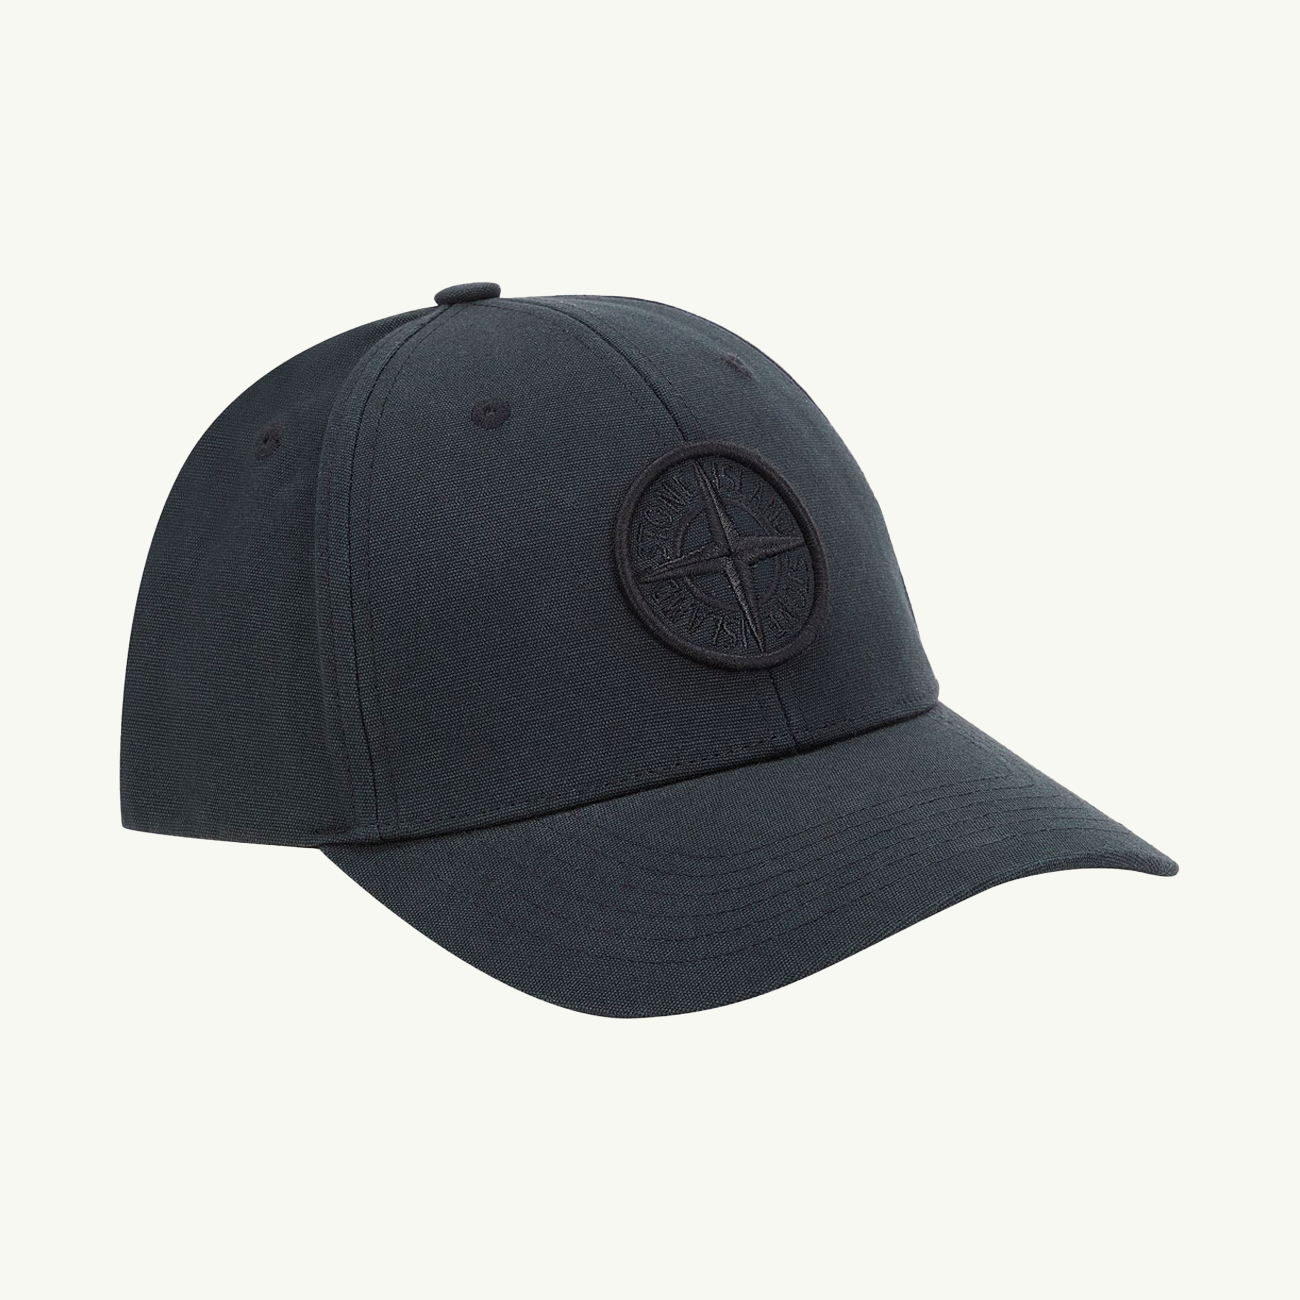 Cap Embroidered Compass Patch - Black 2980